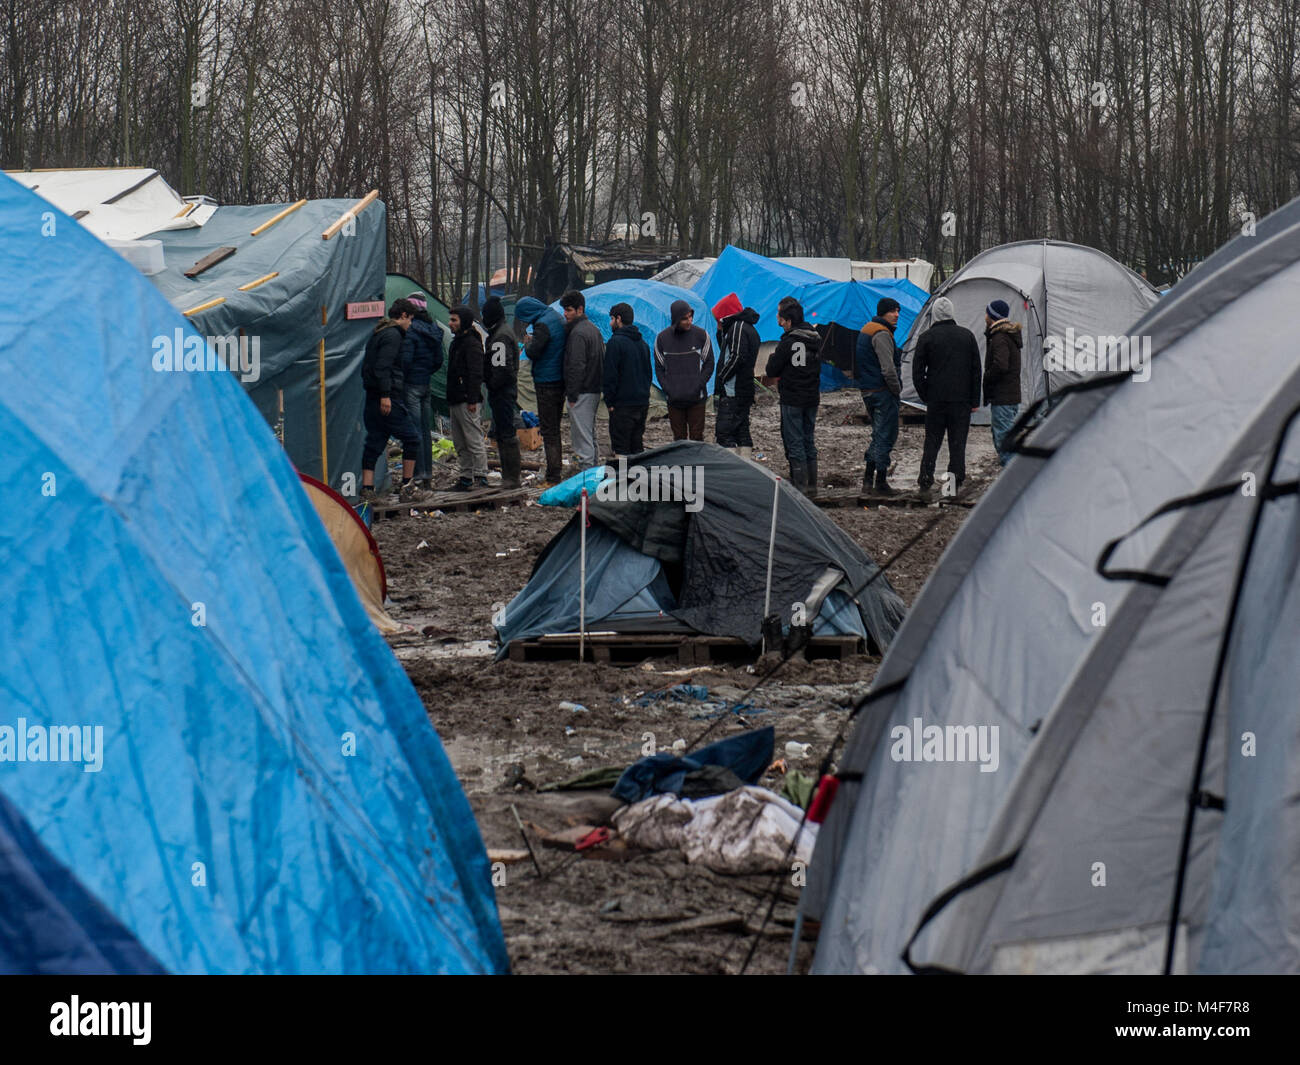 Grande-Synthe, Northern France. 31 January 2016. A General view of the Grande-Synthe refugee camp close to the port of Dunkirk in Northern France. In the camp conditions are grim in part due to thick mud and a lack of basic amenities. Families live in rain soaked tents and huddle around small fires for basic heat. Stock Photo